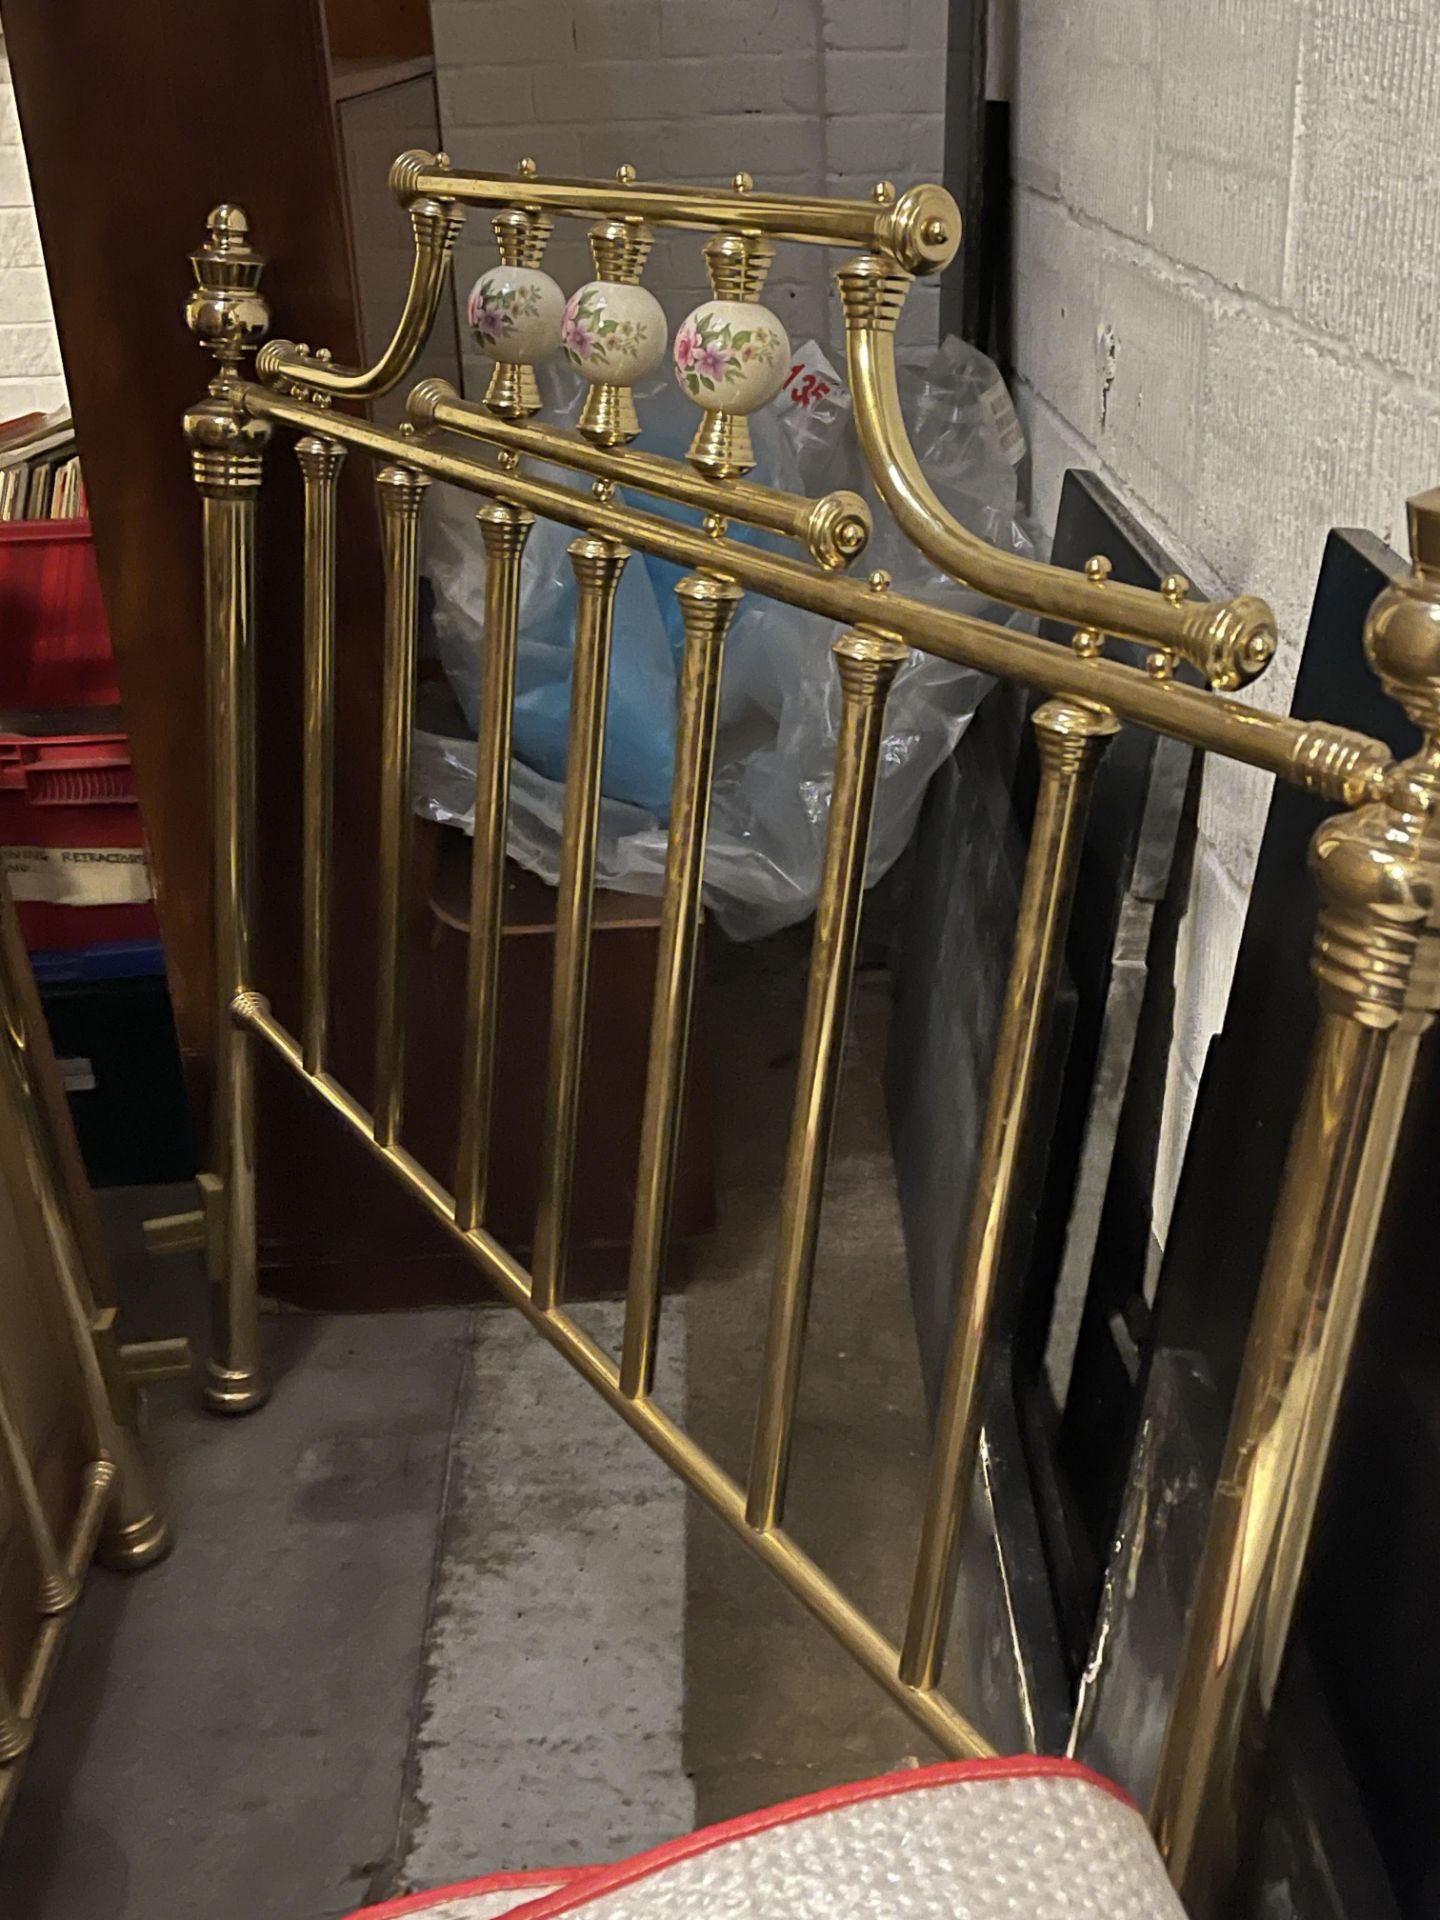 Brass double bed frame very old unclaimed property - Image 5 of 8